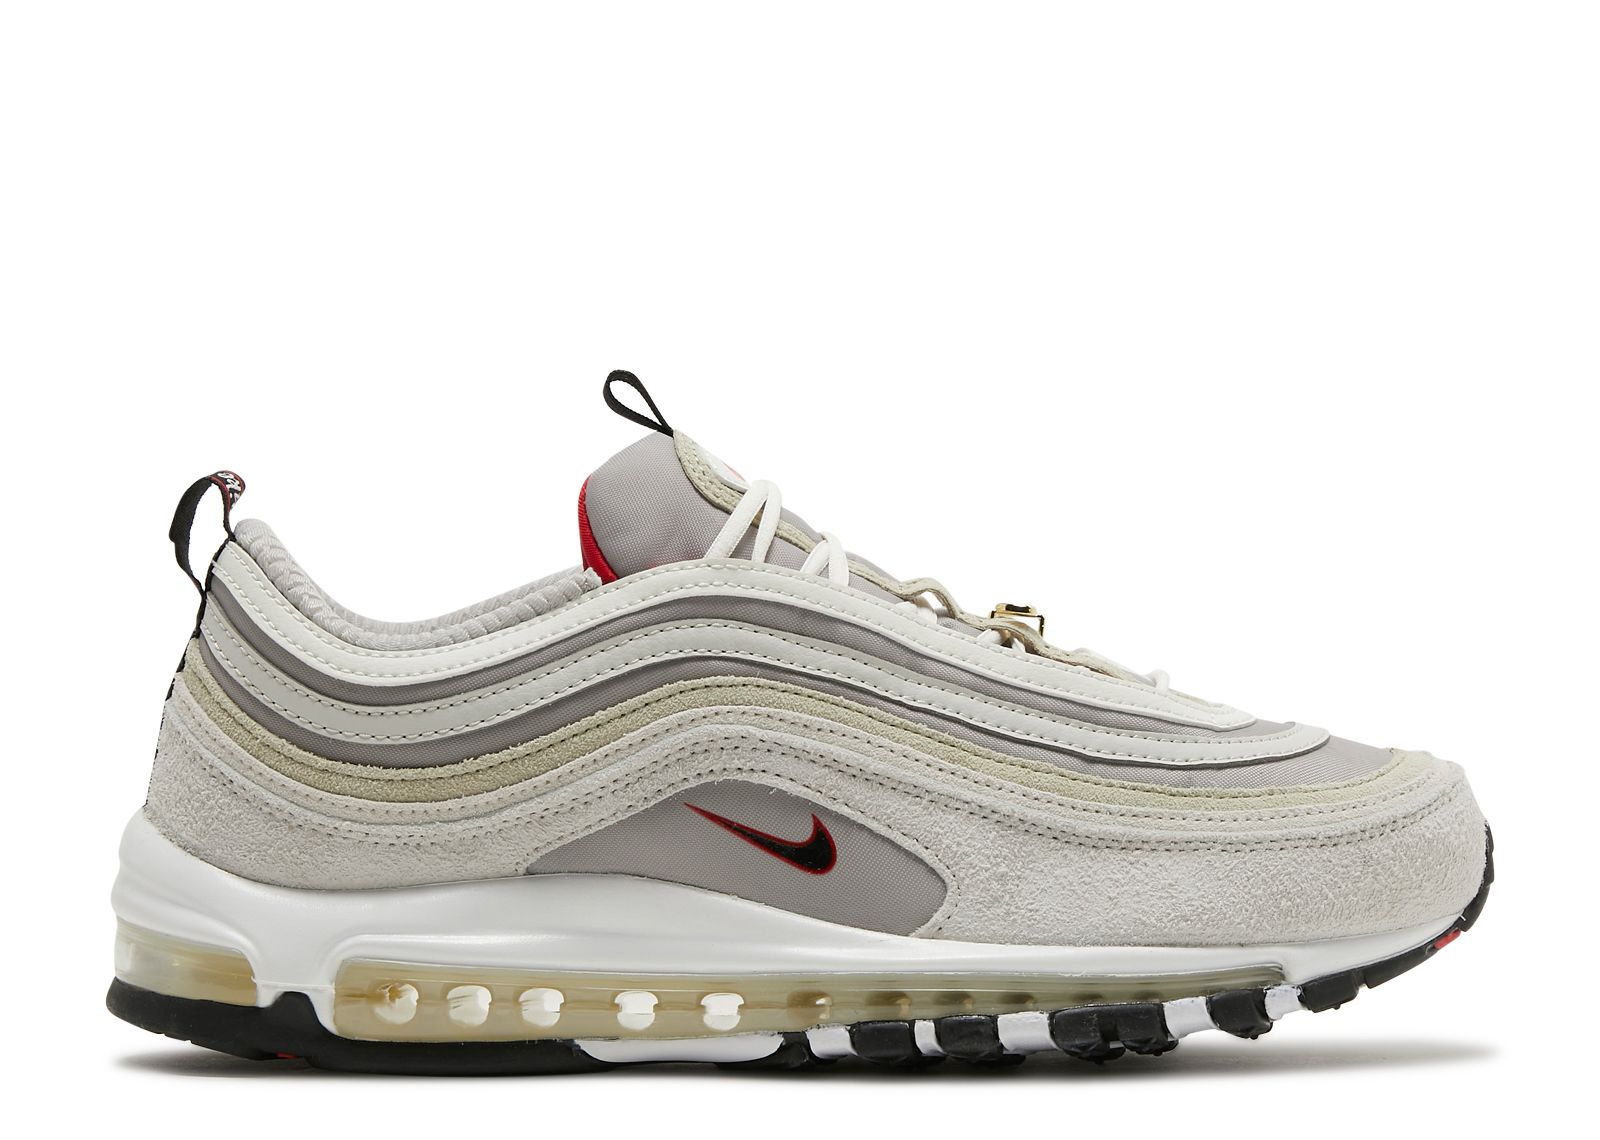 Excavation Potatoes solely Air Max 97 SE 'First Use College Grey' - Nike - DB0246 001 - college  grey/summit white/sail/black | Flight Club